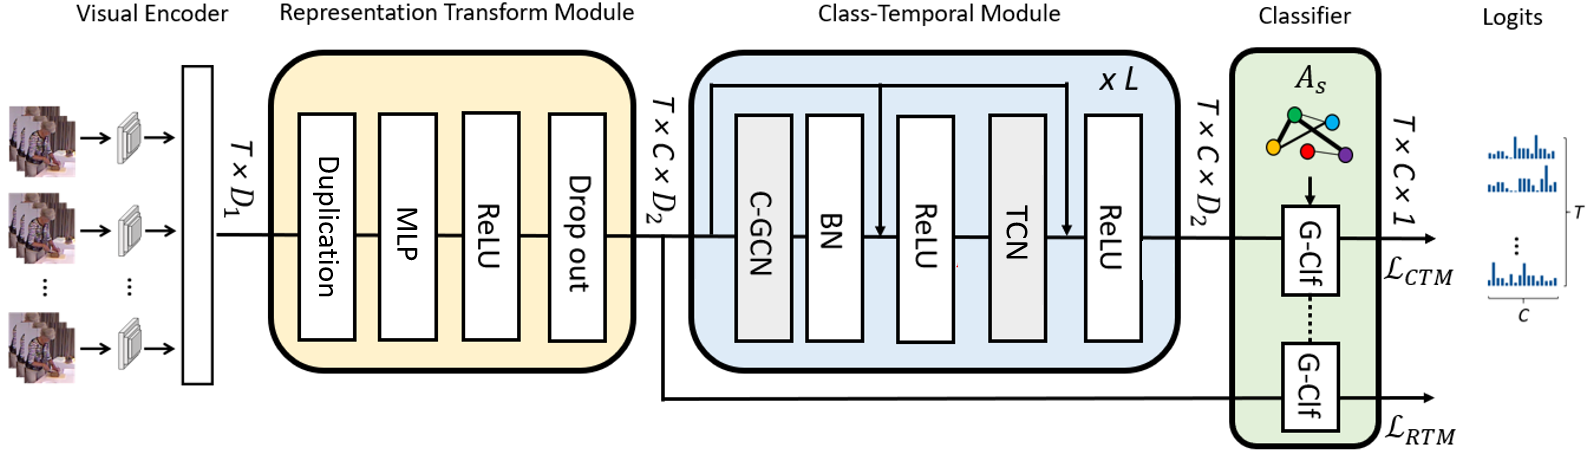 Overall structure. The model composed of a Visual
Encoder, a Representation Transform Module, a Class-Temporal Module (with C-GCN and TCN) and a G-Classifier (i.e. G-Clf). Note: Two G-Clfs are sharing the weights.